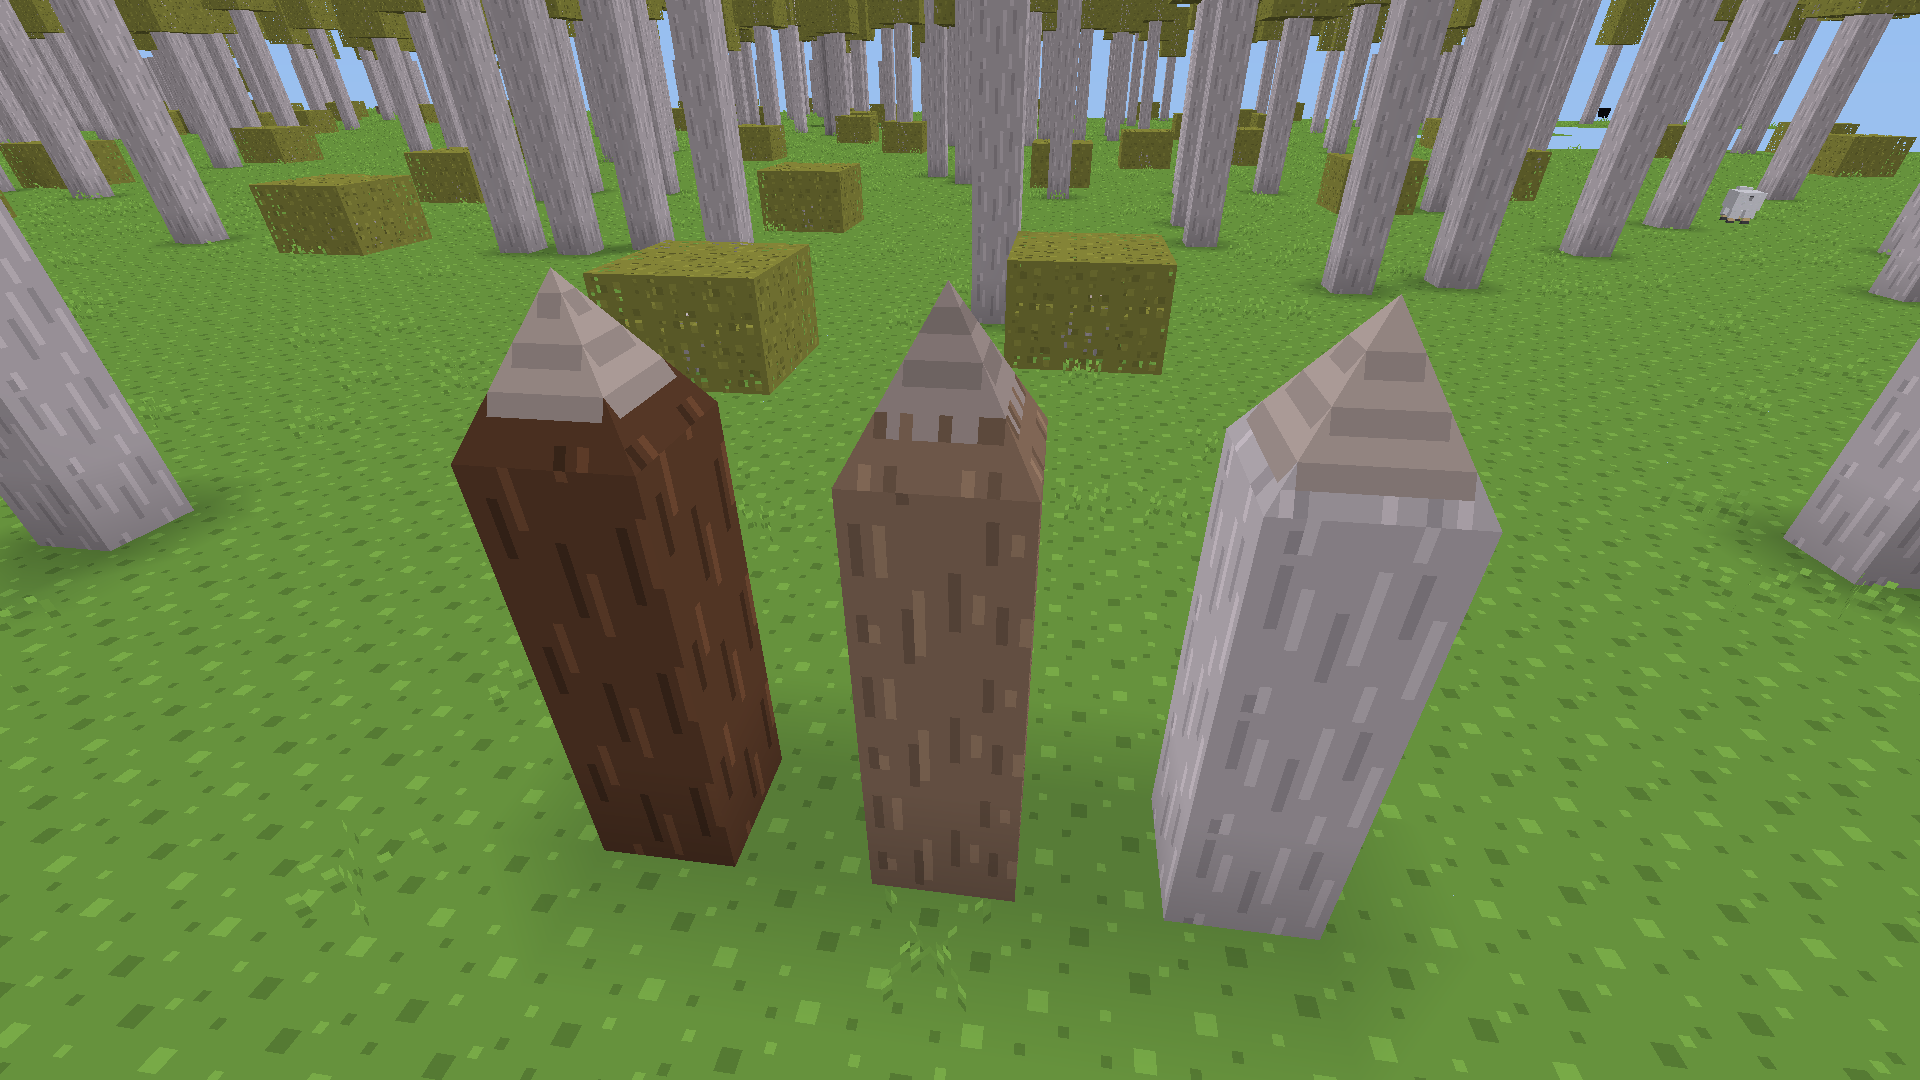 Log spikes made of the three types of tree in Repixture